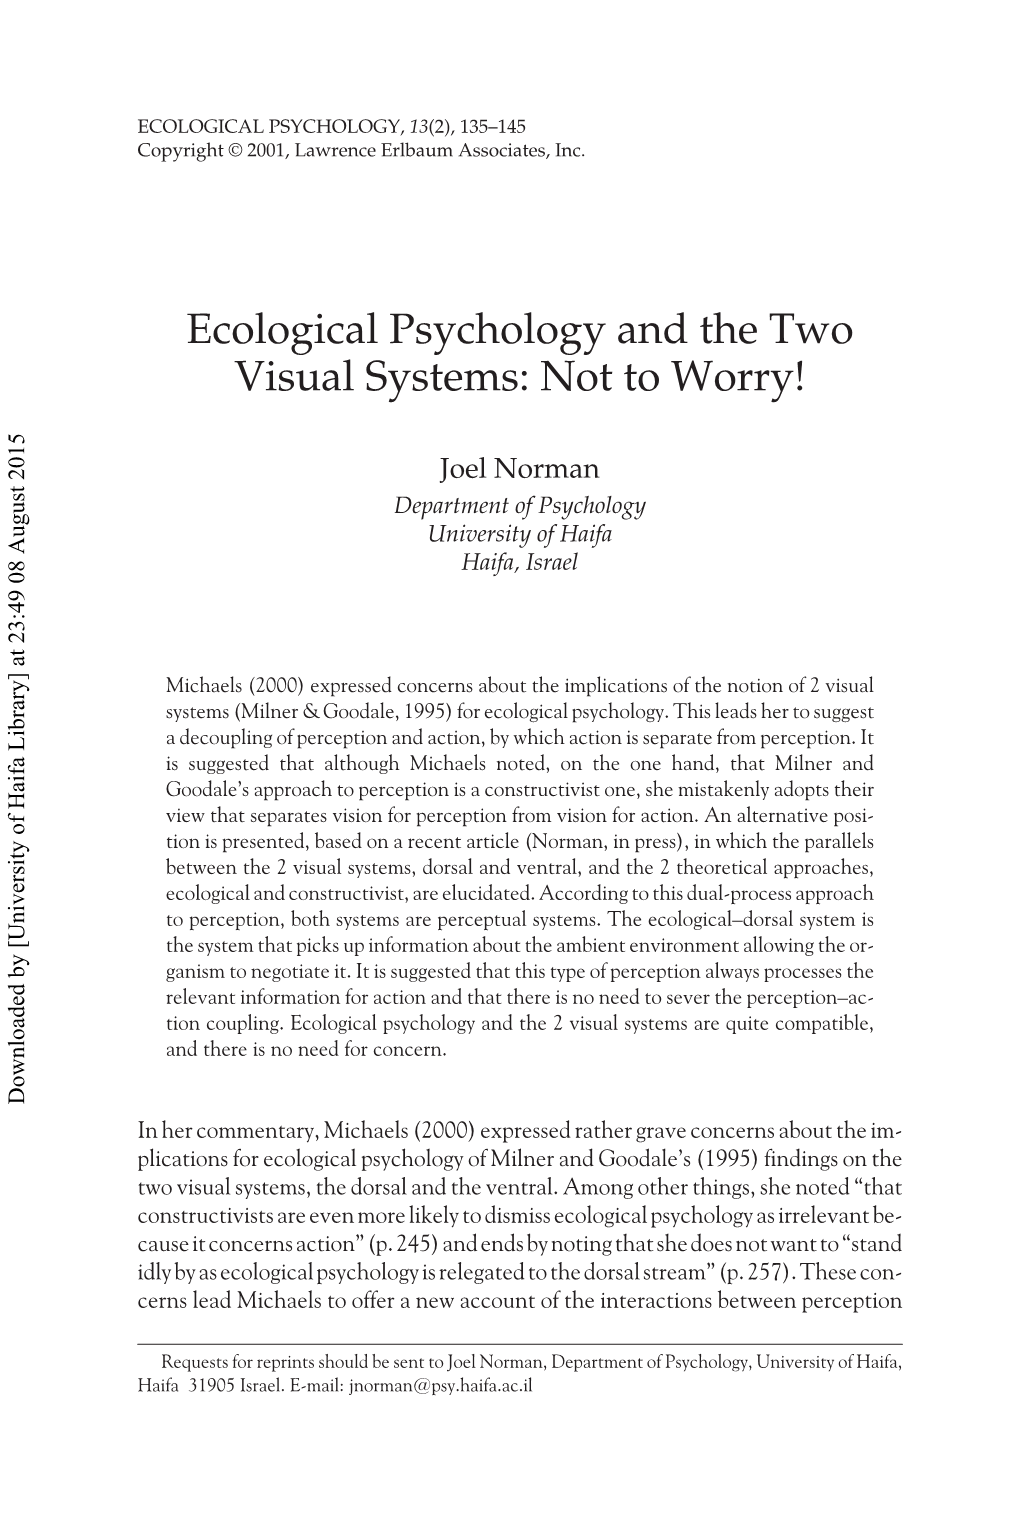 Ecological Psychology and the Two Visual Systems: Not to Worry!